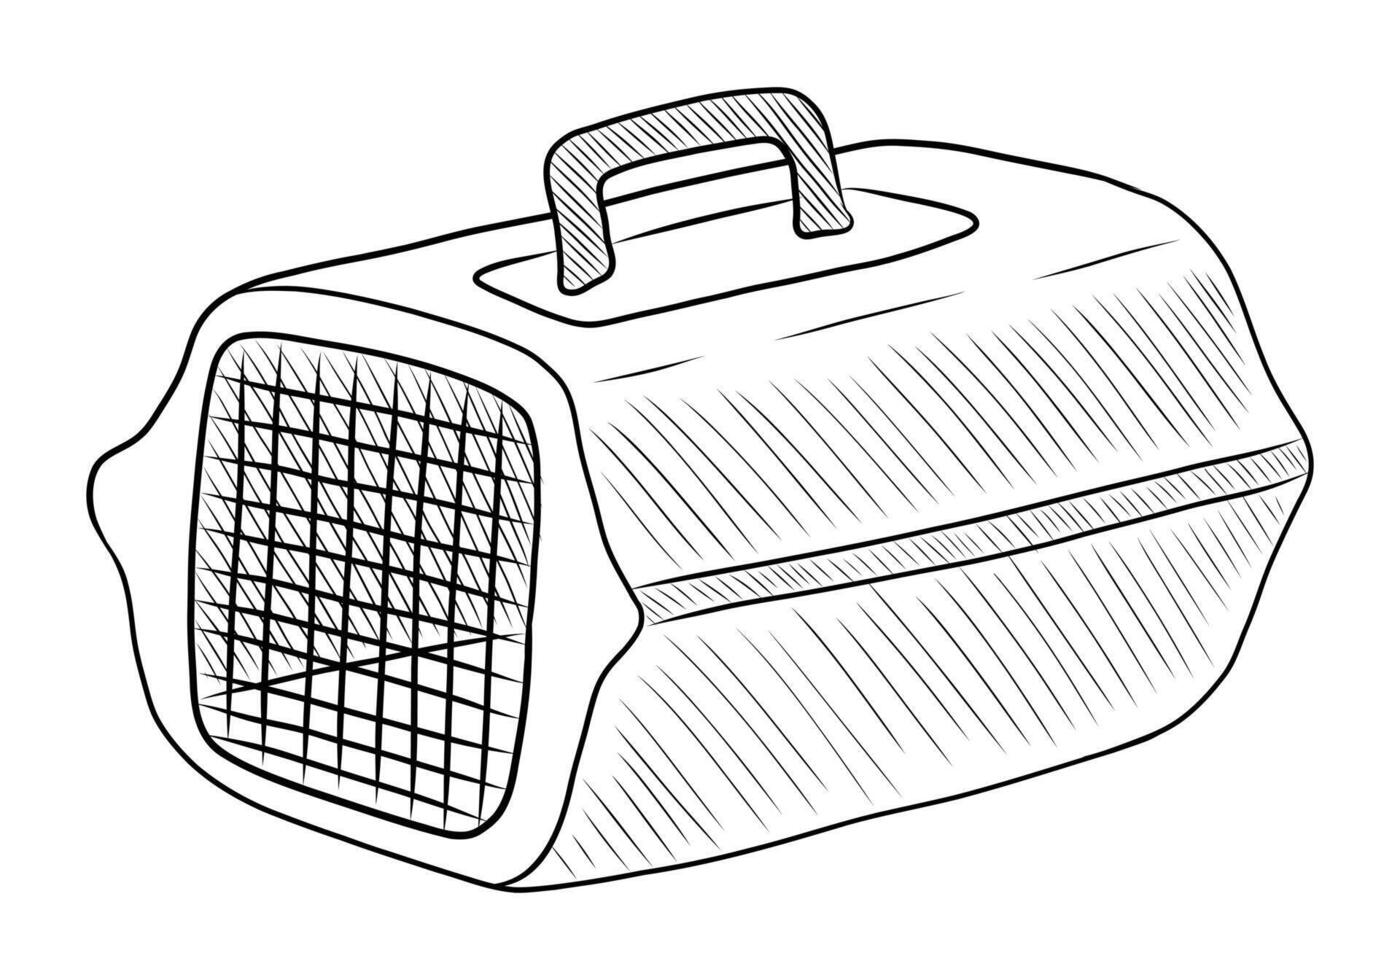 BLACK AND WHITE VECTOR DRAWING OF A PET CARRIER